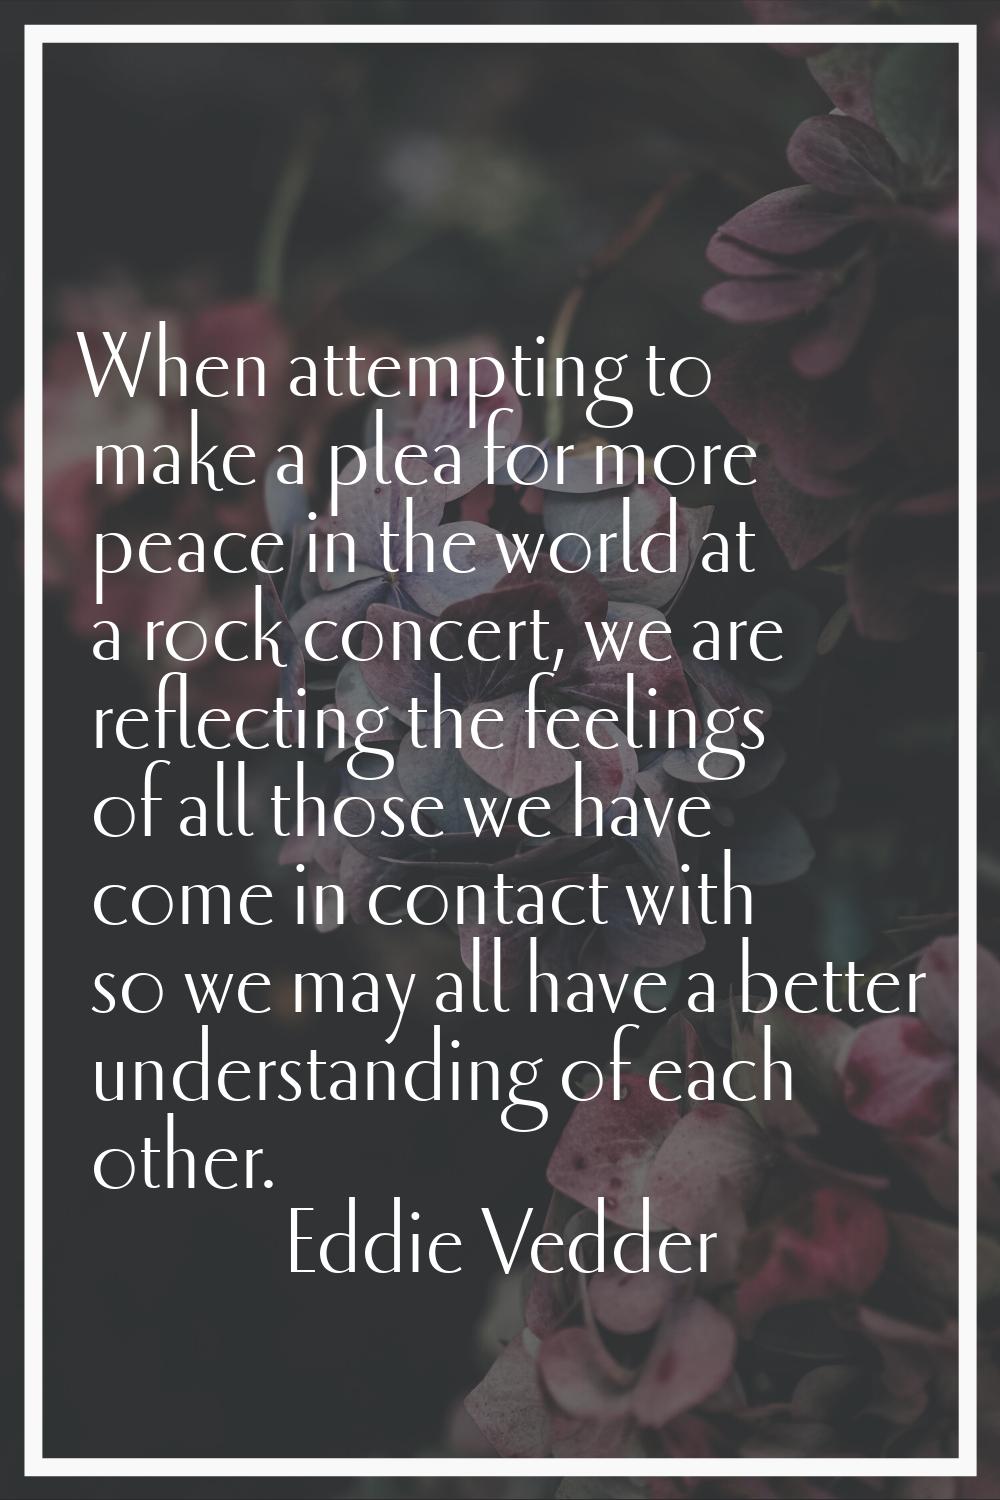 When attempting to make a plea for more peace in the world at a rock concert, we are reflecting the